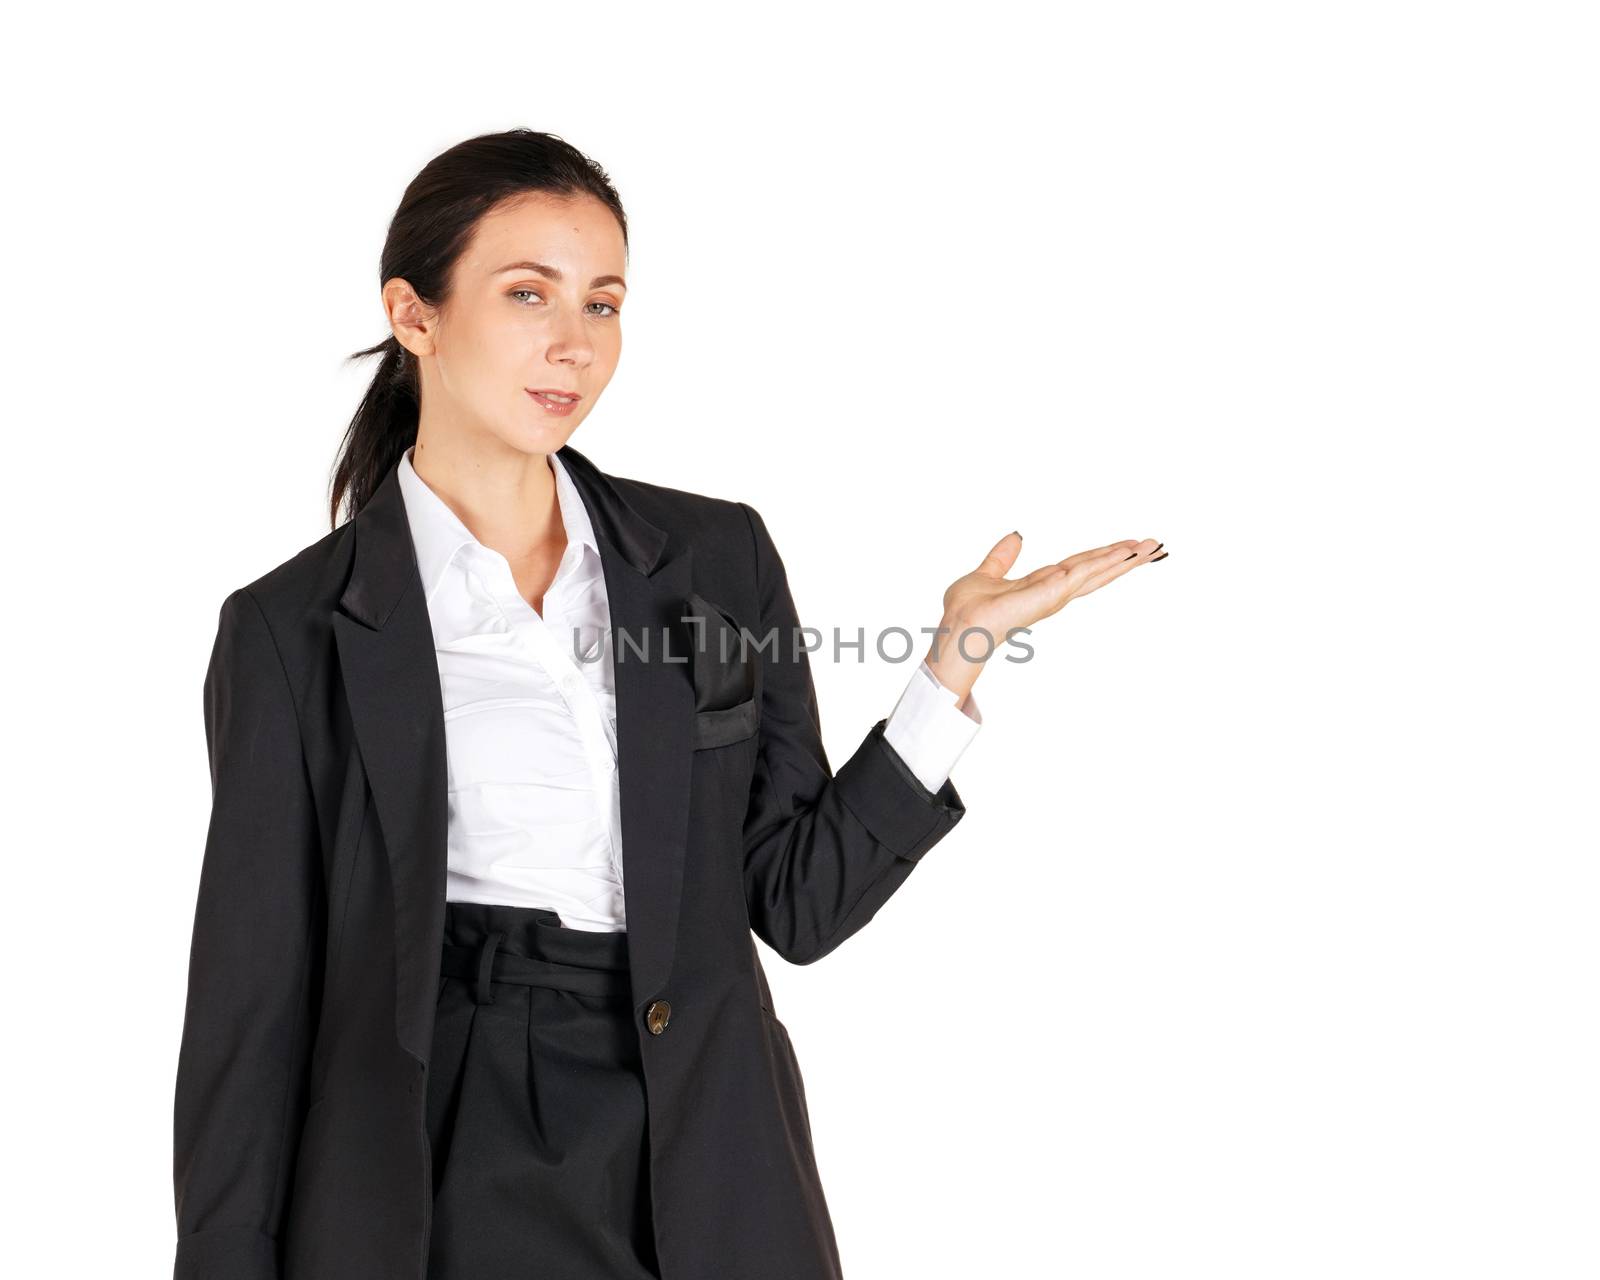 A business woman in white shirt and  black suit, smiling and branding to the left to recommend a worthwhile real estate project. Portrait on white background with studio light.